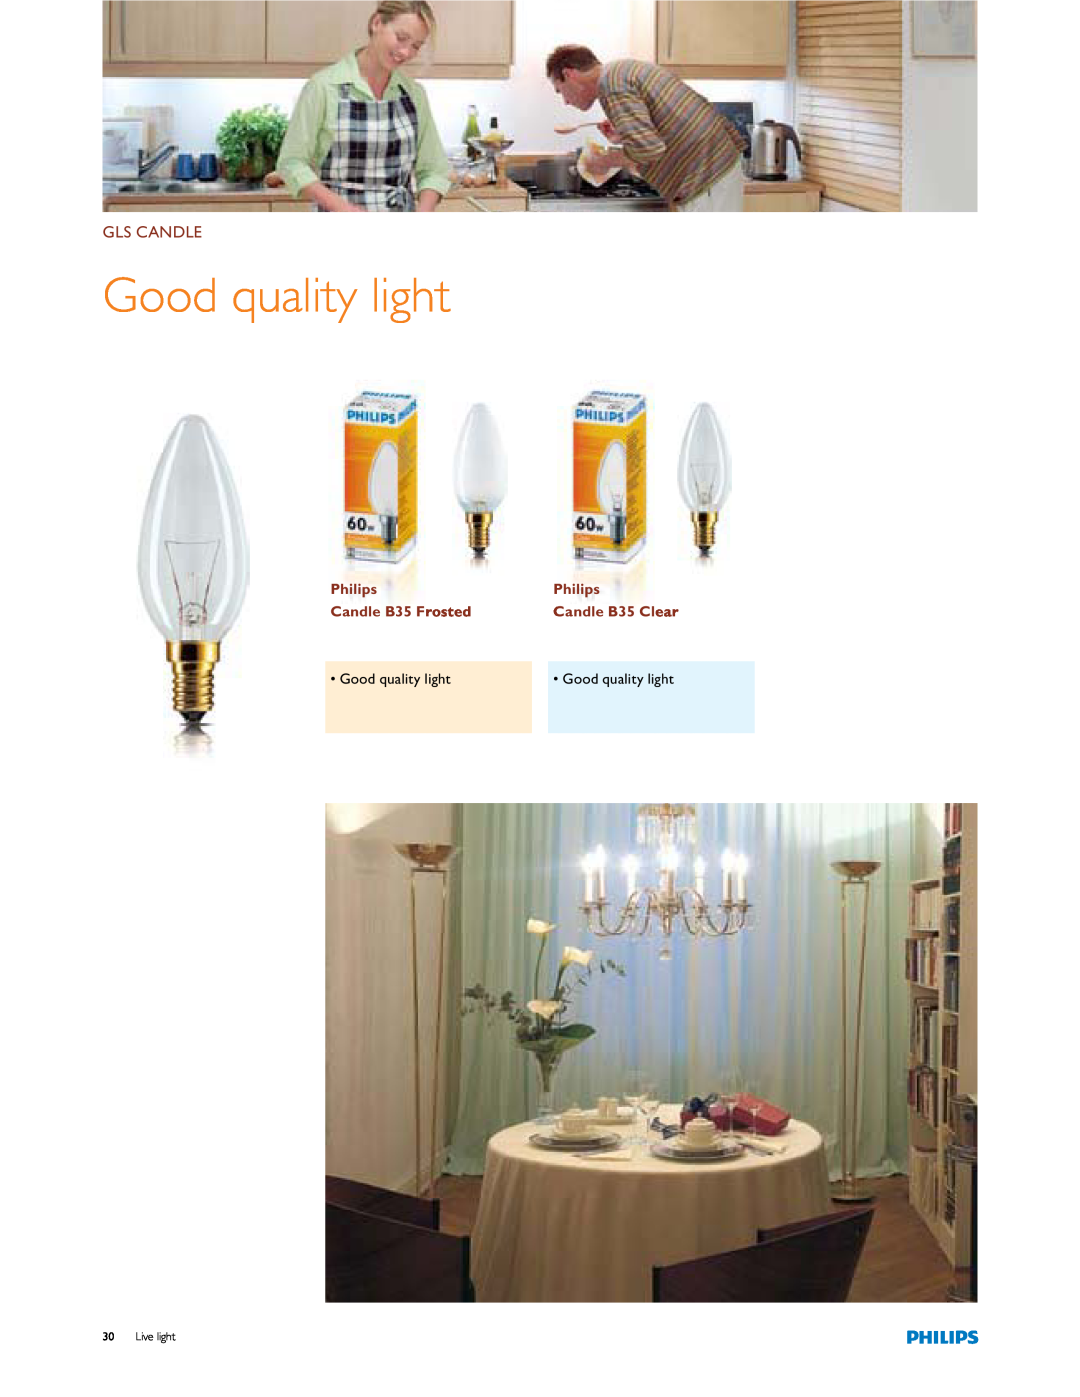 Philips manual Gls Candle, Philips, Candle B35 Frosted, Candle B35 Clear, rGood quality light 